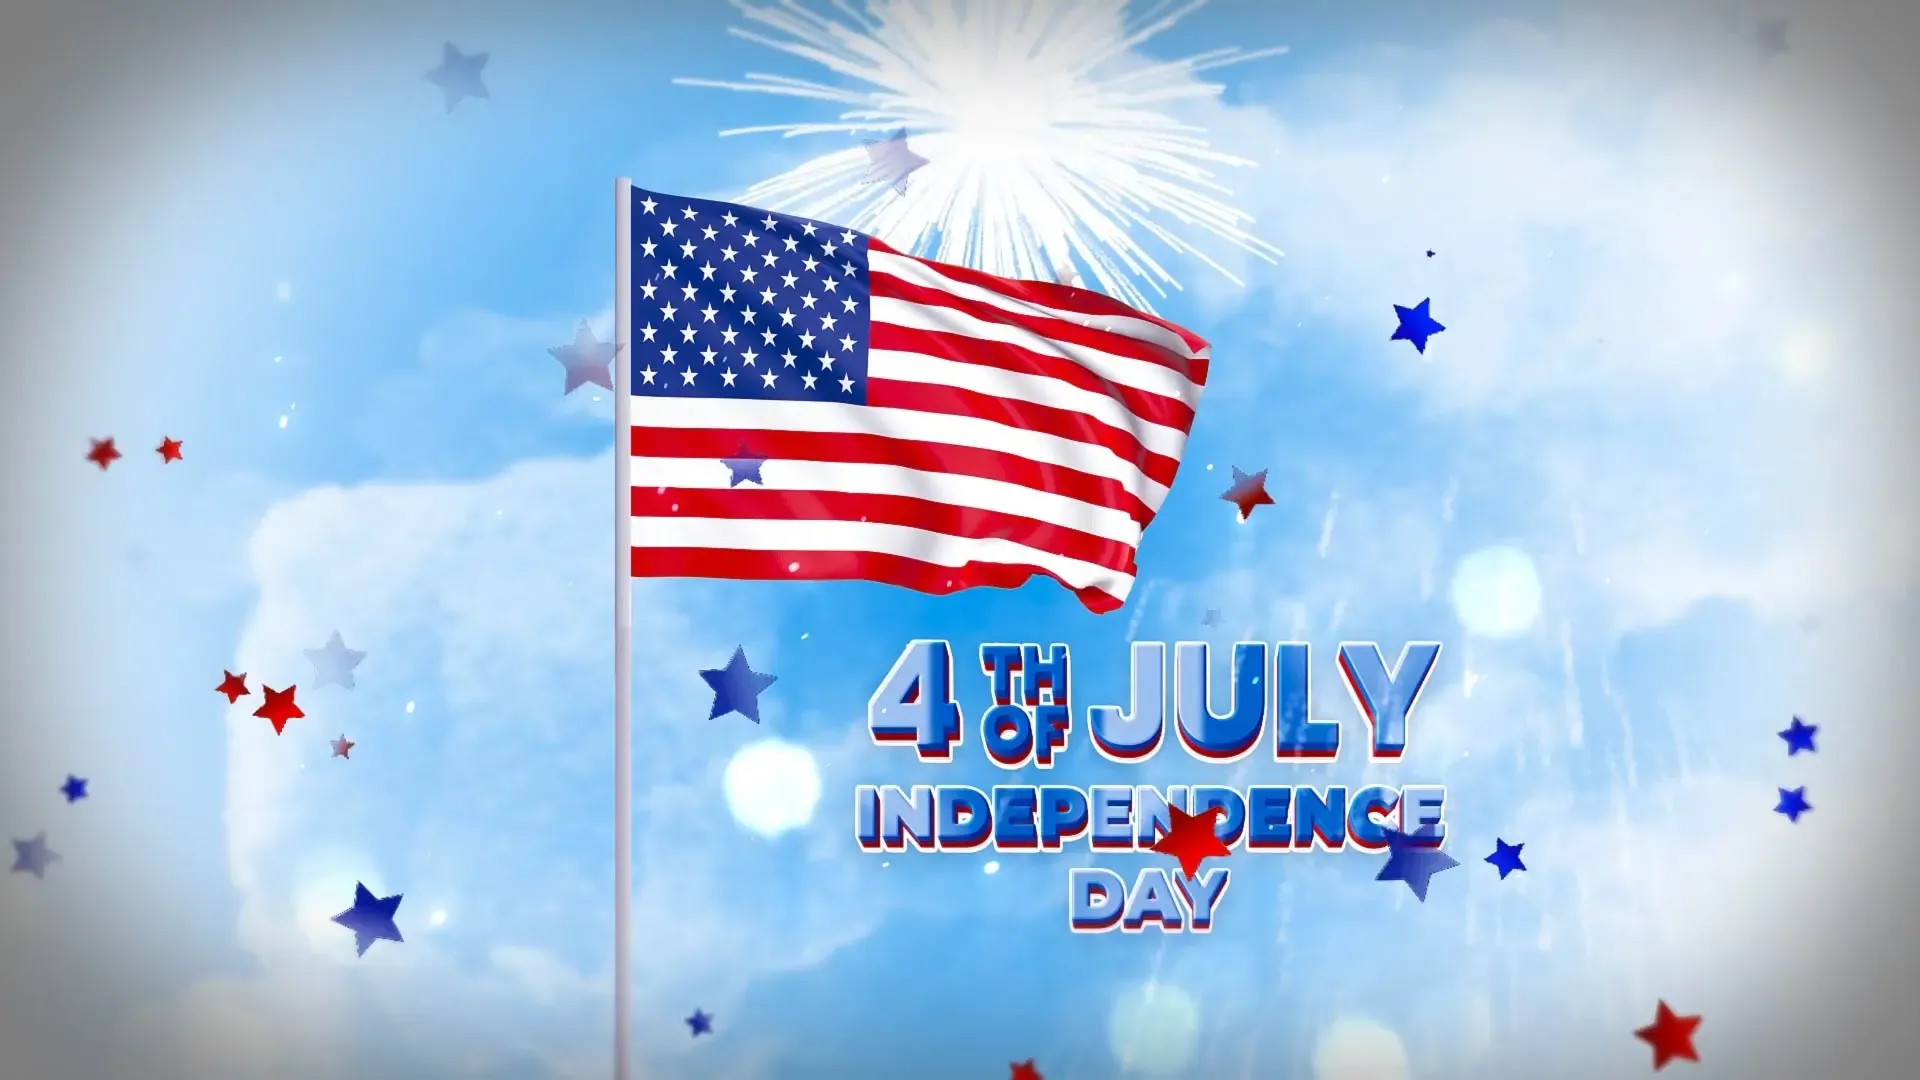 July 4th Independence Day Intro